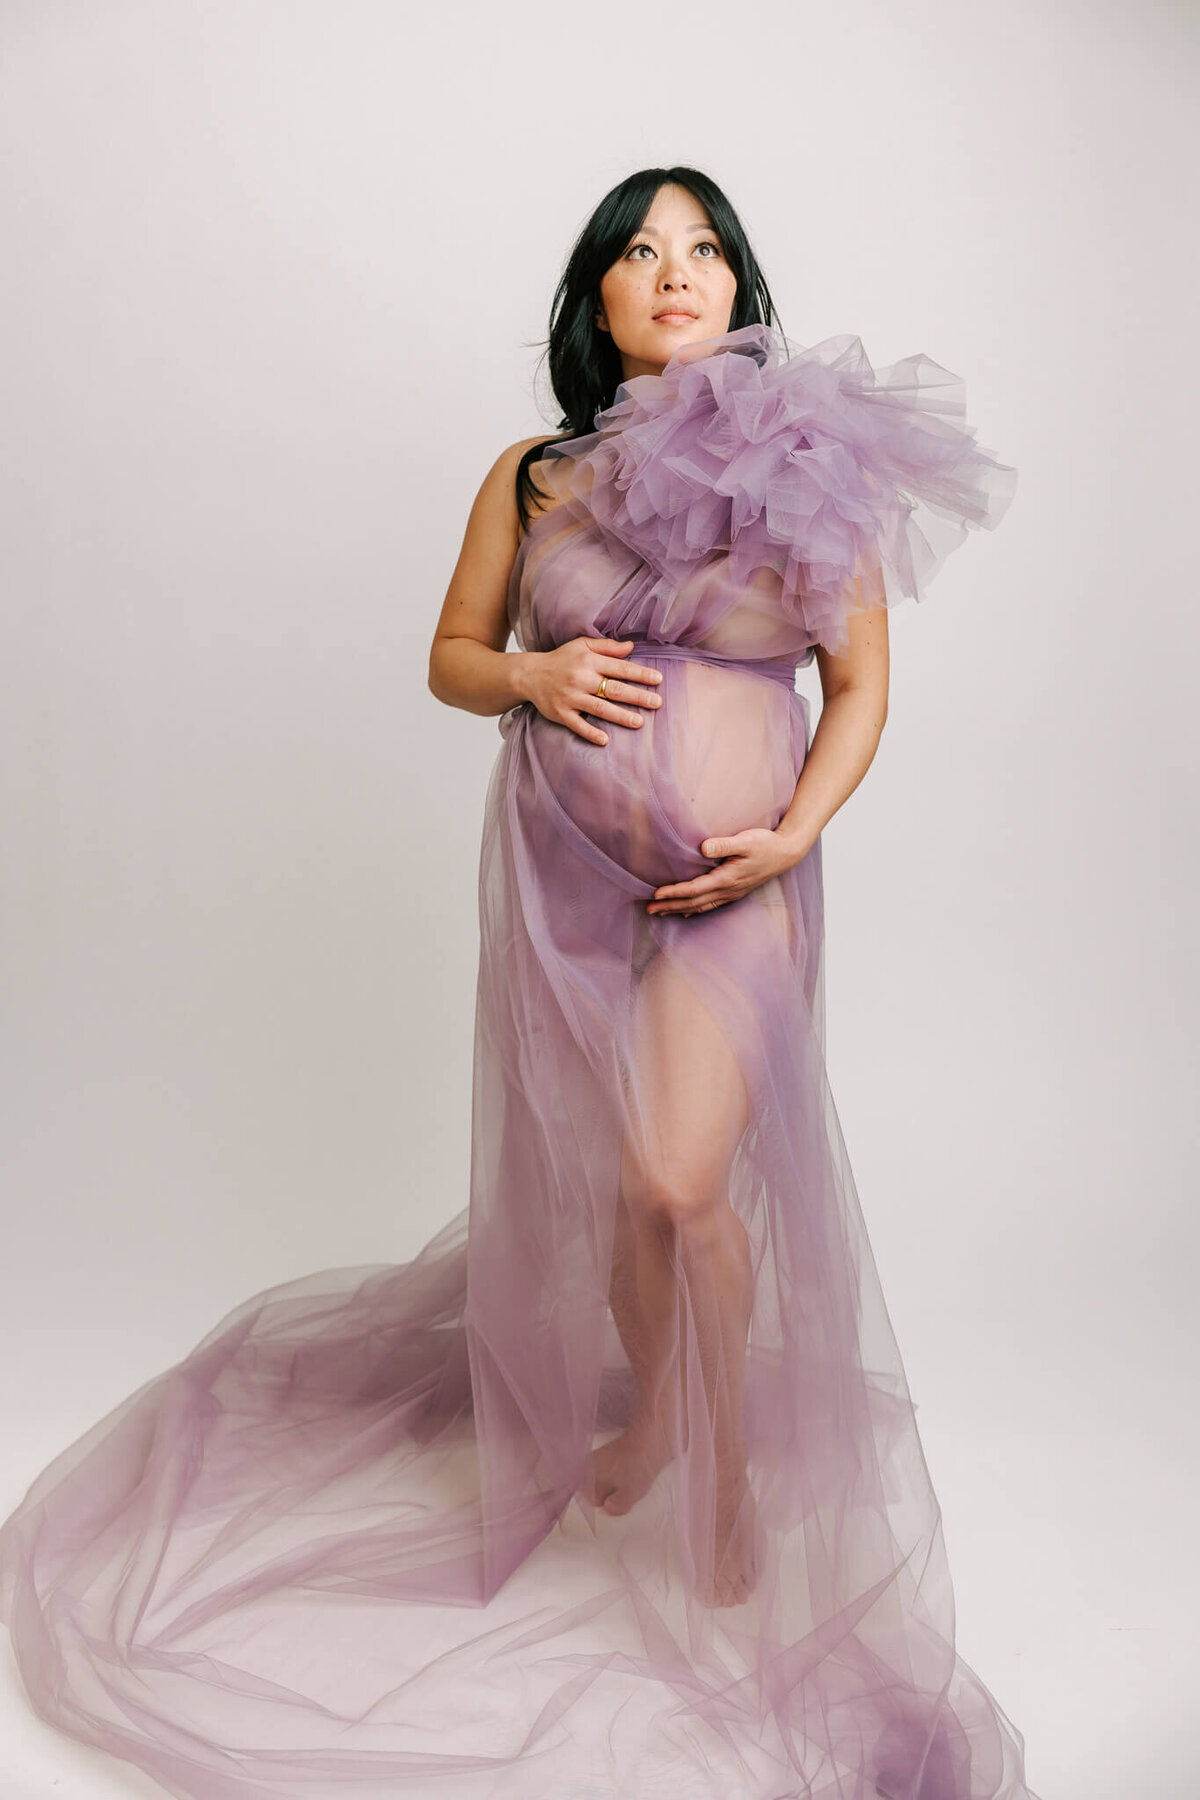 portrait of a mom wearing sheer purple dress with poof on sleeve. She had her hands on her belly and is looking up athe the light.